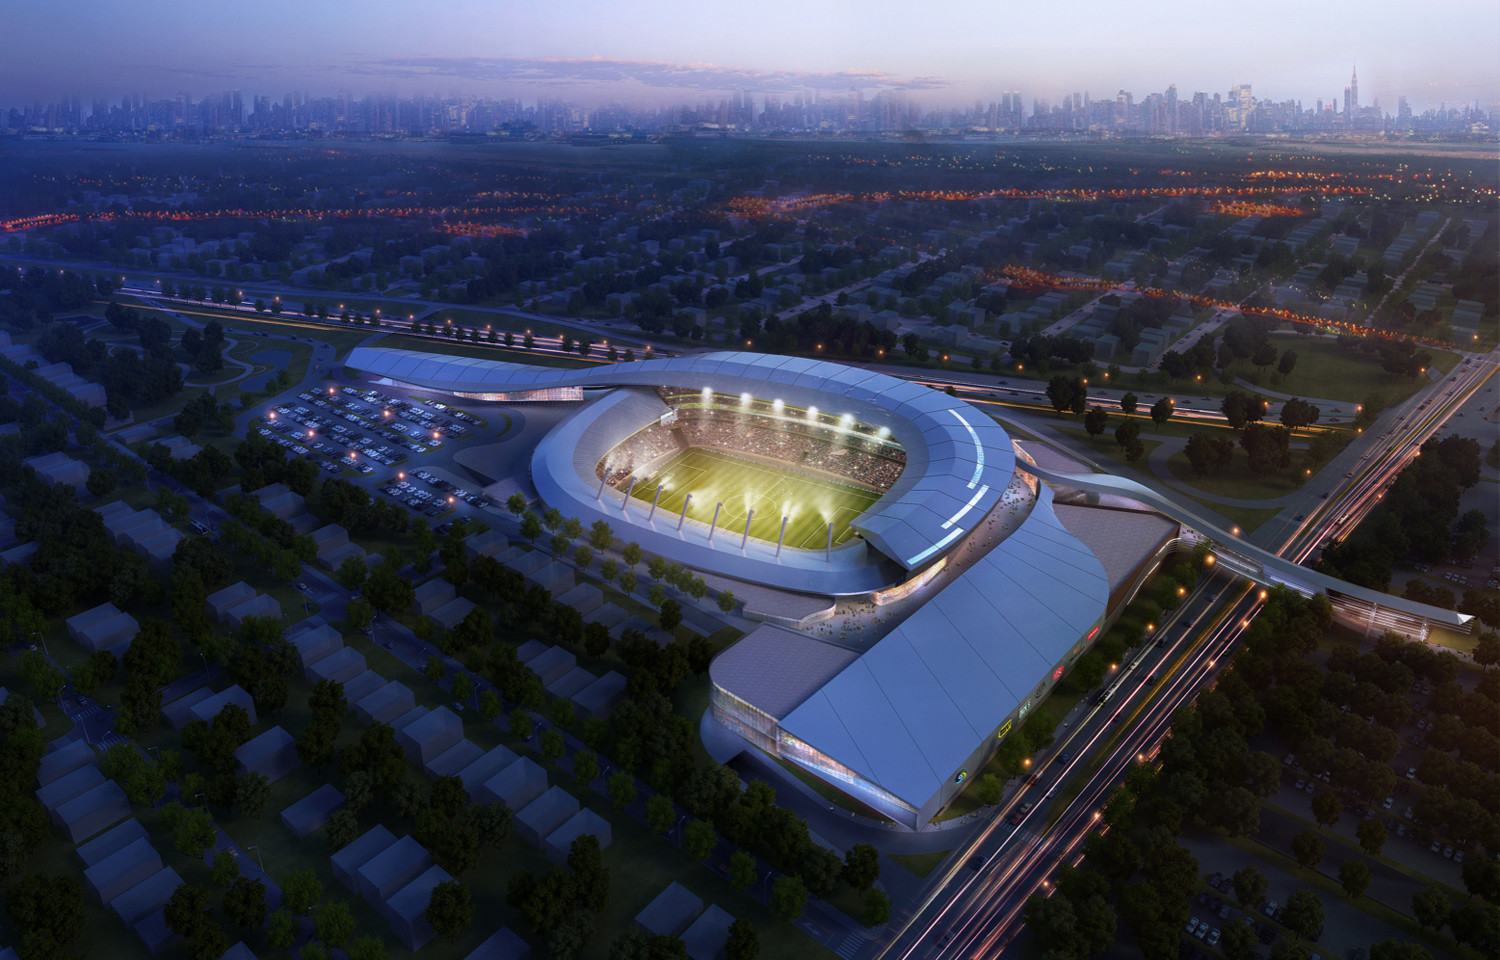 An artist’s rendering of the Cosmos’ proposed stadium. The $400 million complex would include a 25,000-seat stadium, a hotel, retail outlets, rest-aurants, a community center and a public park.